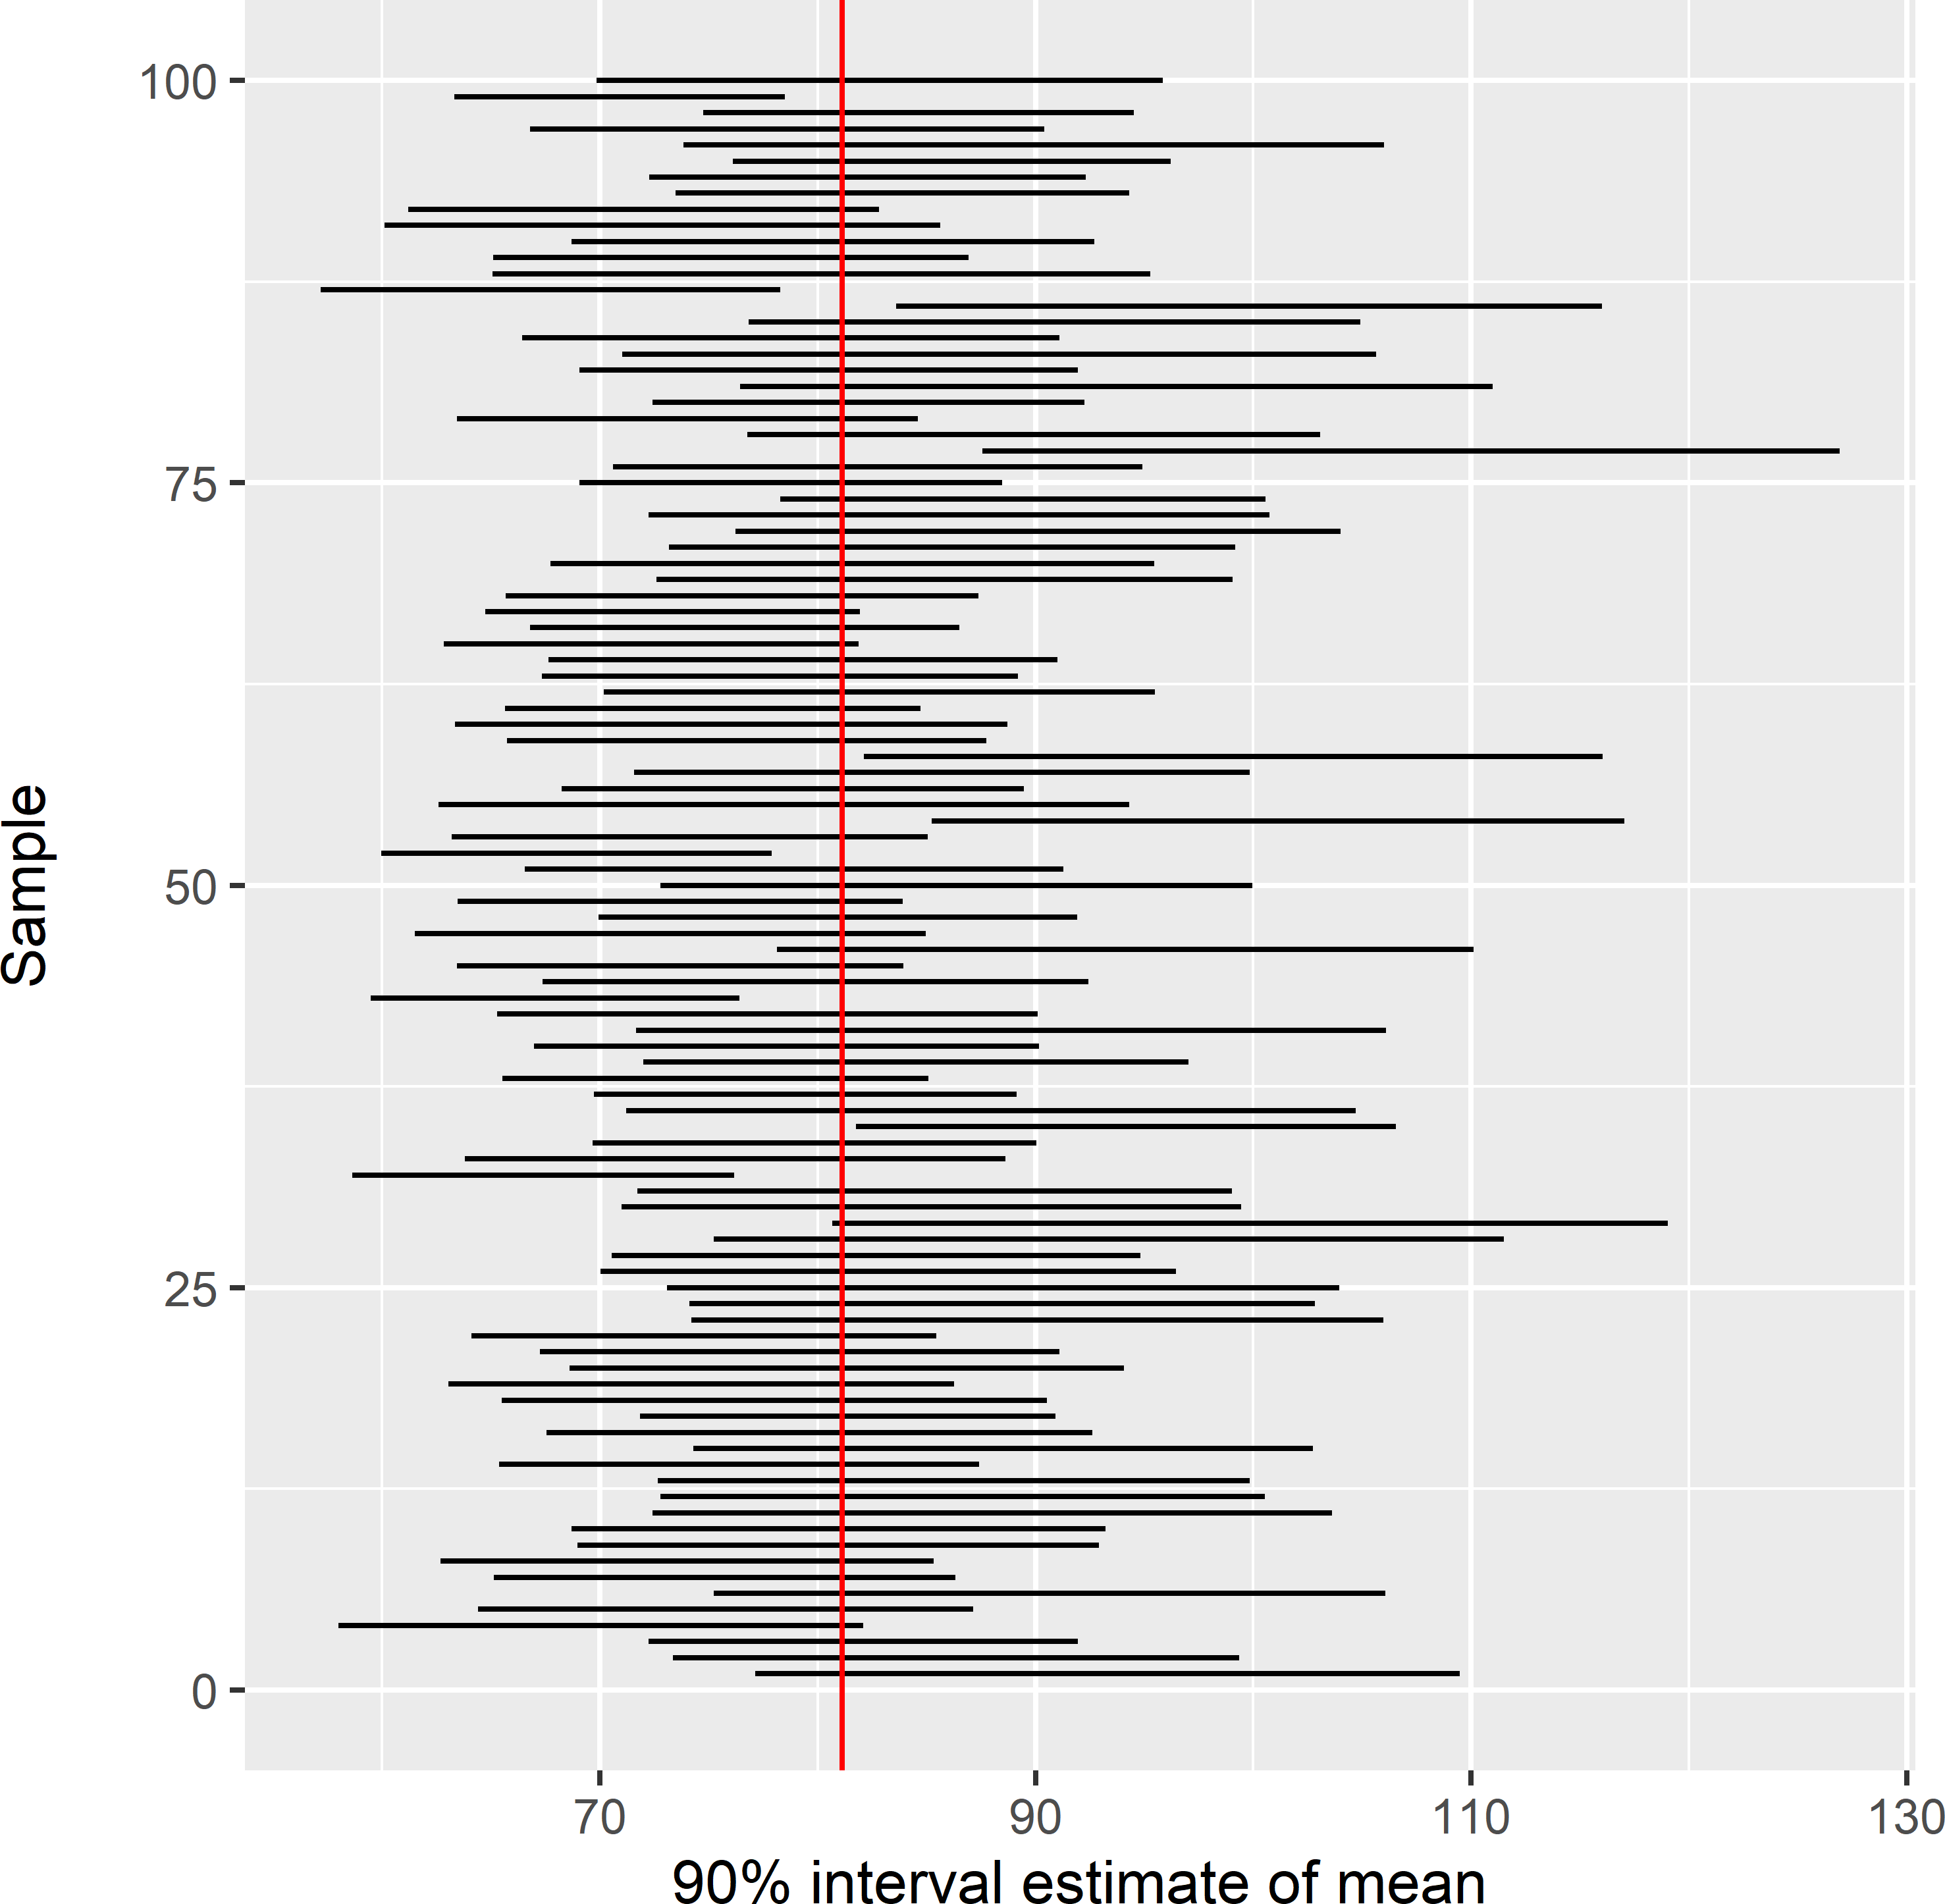 Estimated confidence intervals of the mean SOM concentration (g kg-1) in Voorst, estimated from 100 simple random samples of size 40. The vertical red line is at the true population mean (81.1 g kg-1).